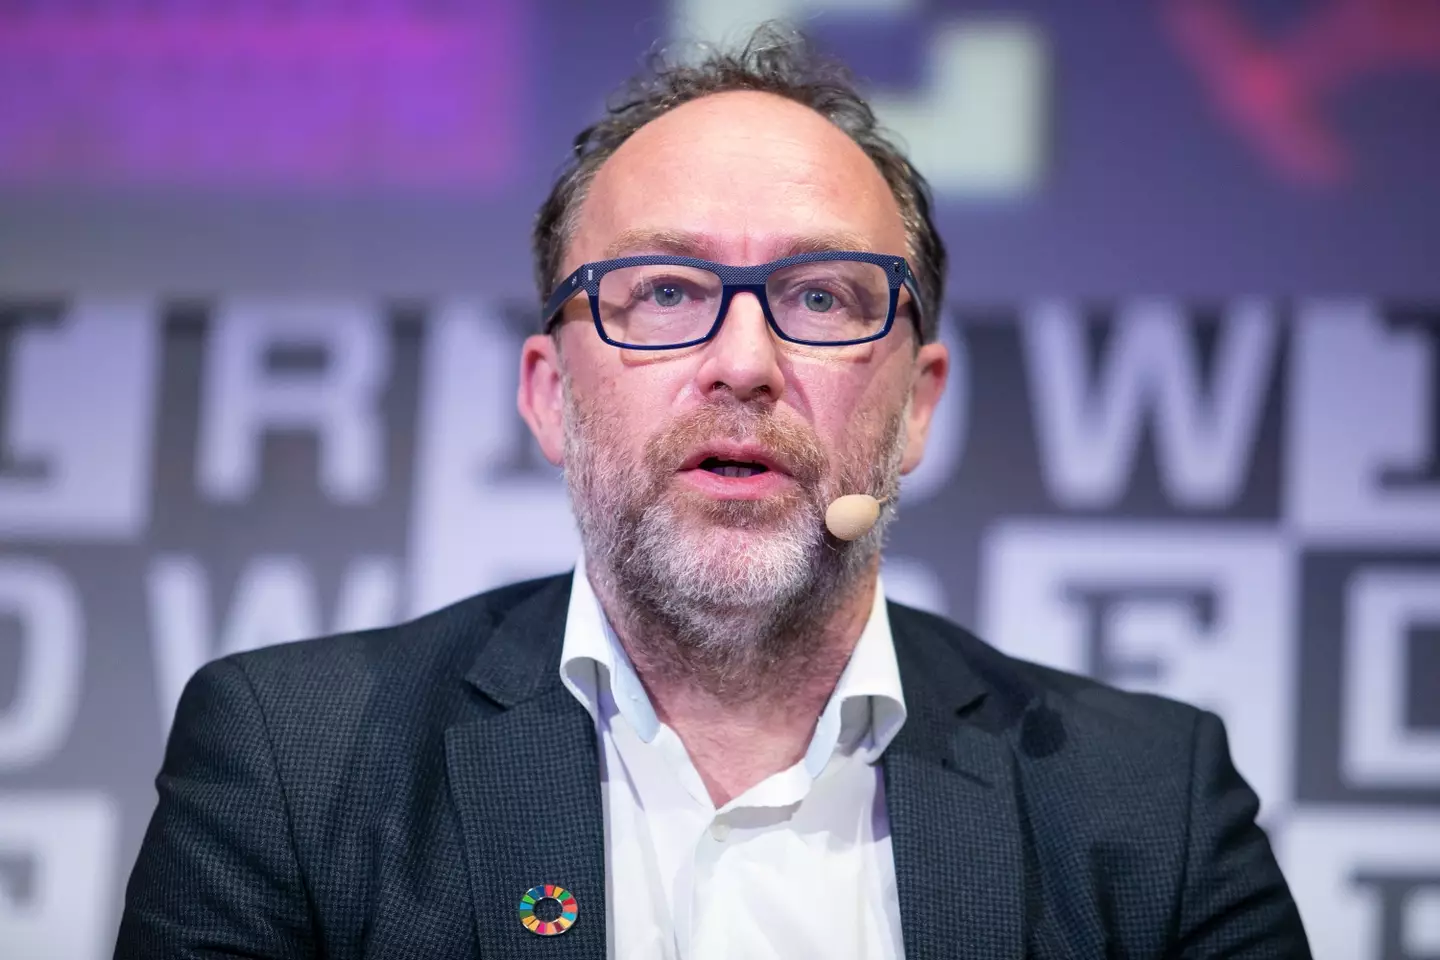 Jimmy Wales appears to have responded to Elon Musk's donation offer.